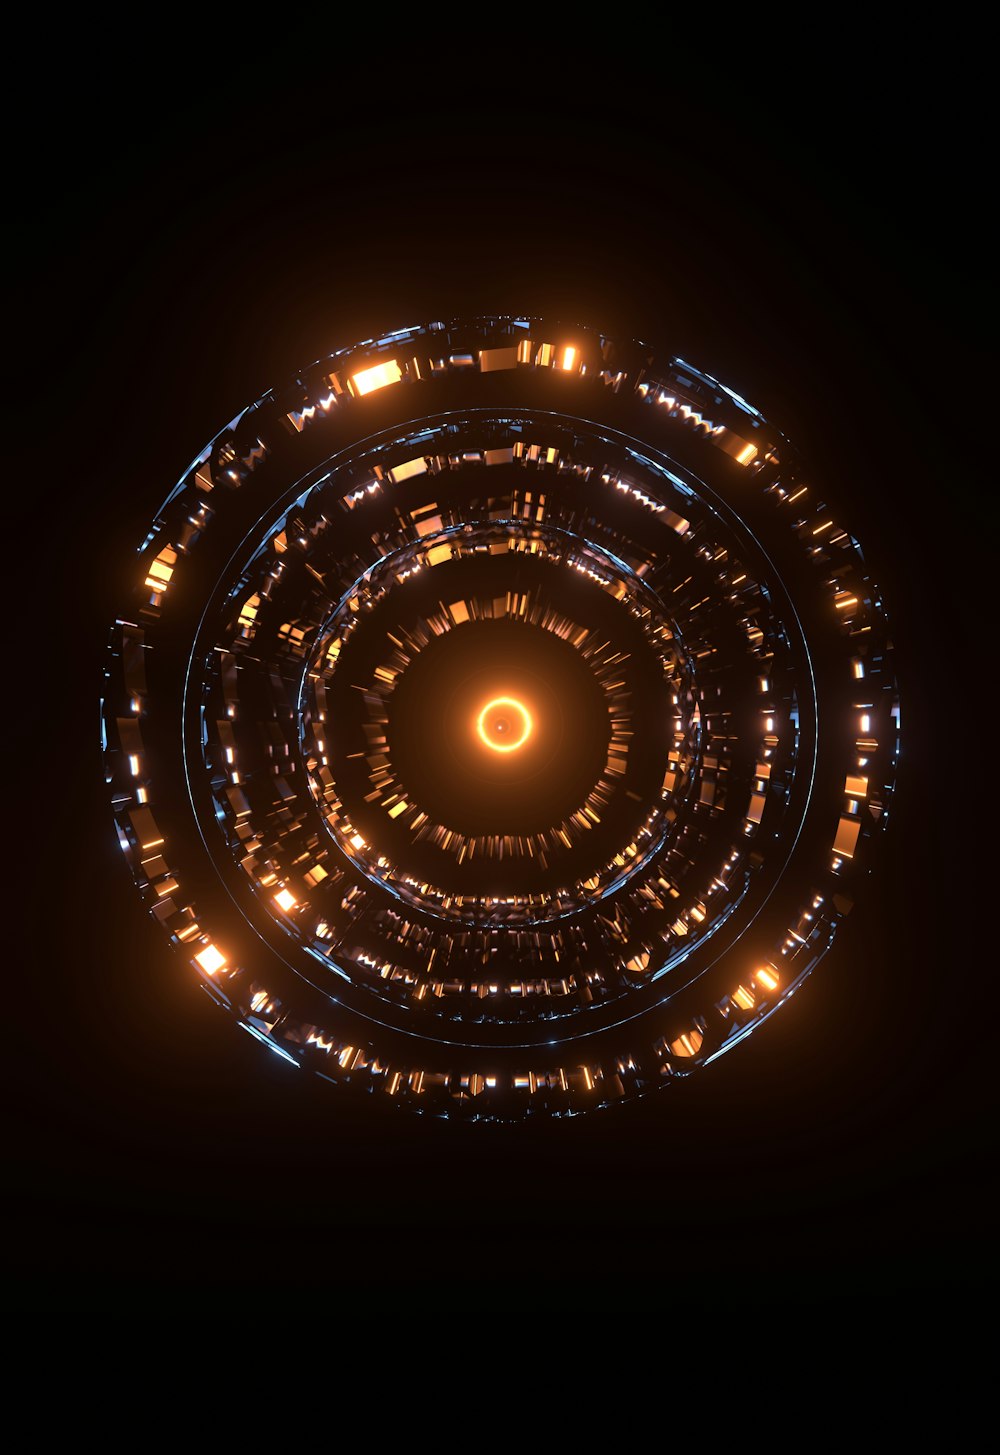 a circular object with lights